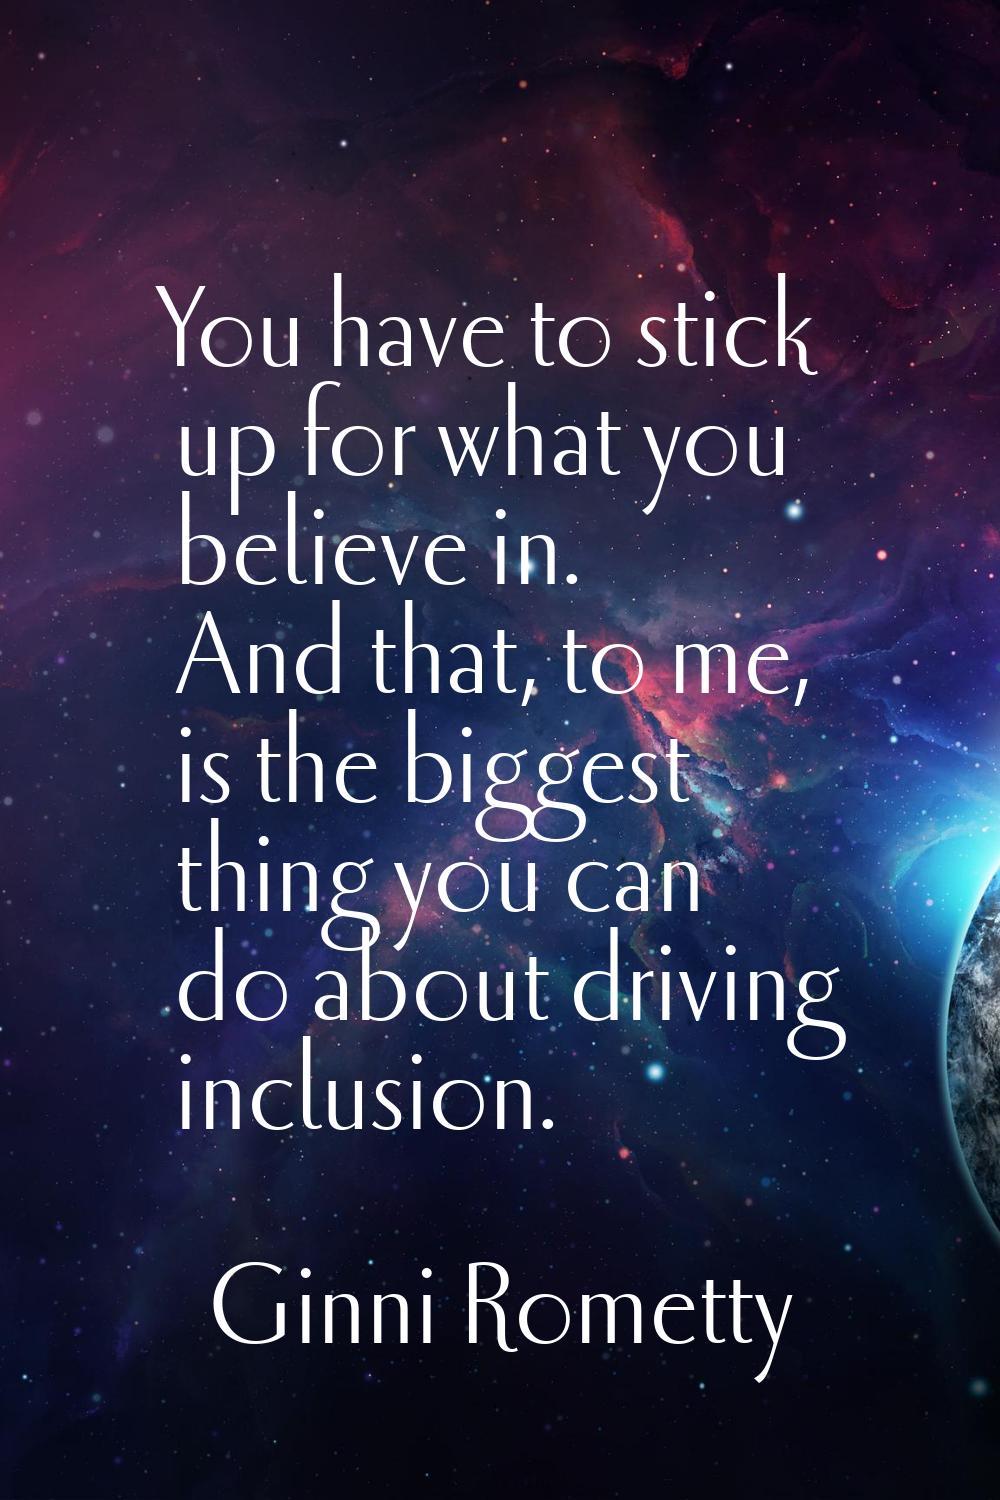 You have to stick up for what you believe in. And that, to me, is the biggest thing you can do abou